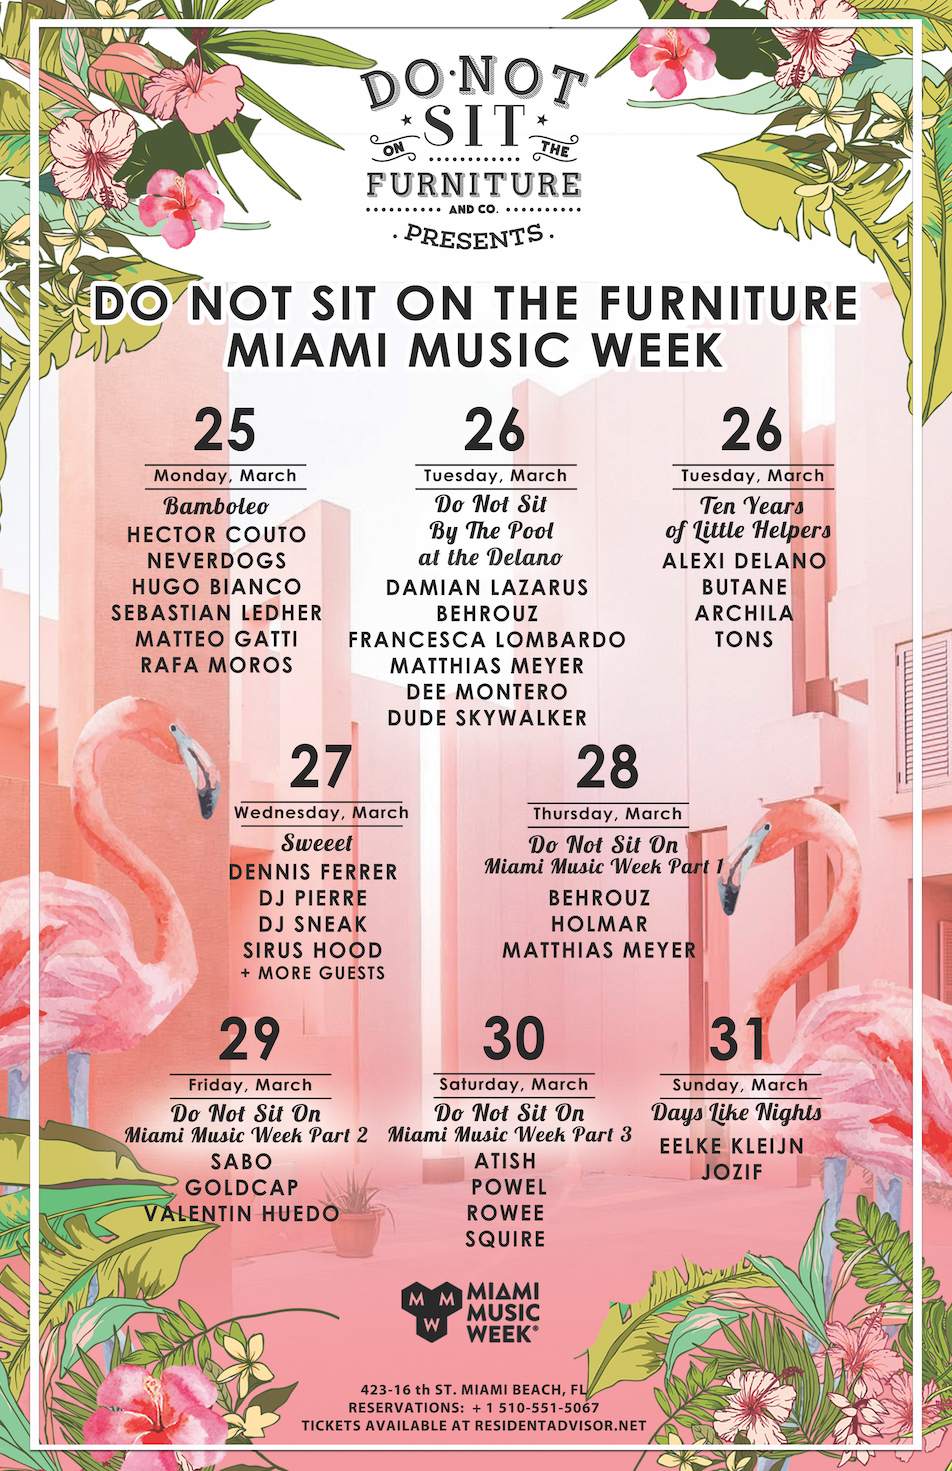 Do Not Sit On The Furniture announces Miami Music Week program image